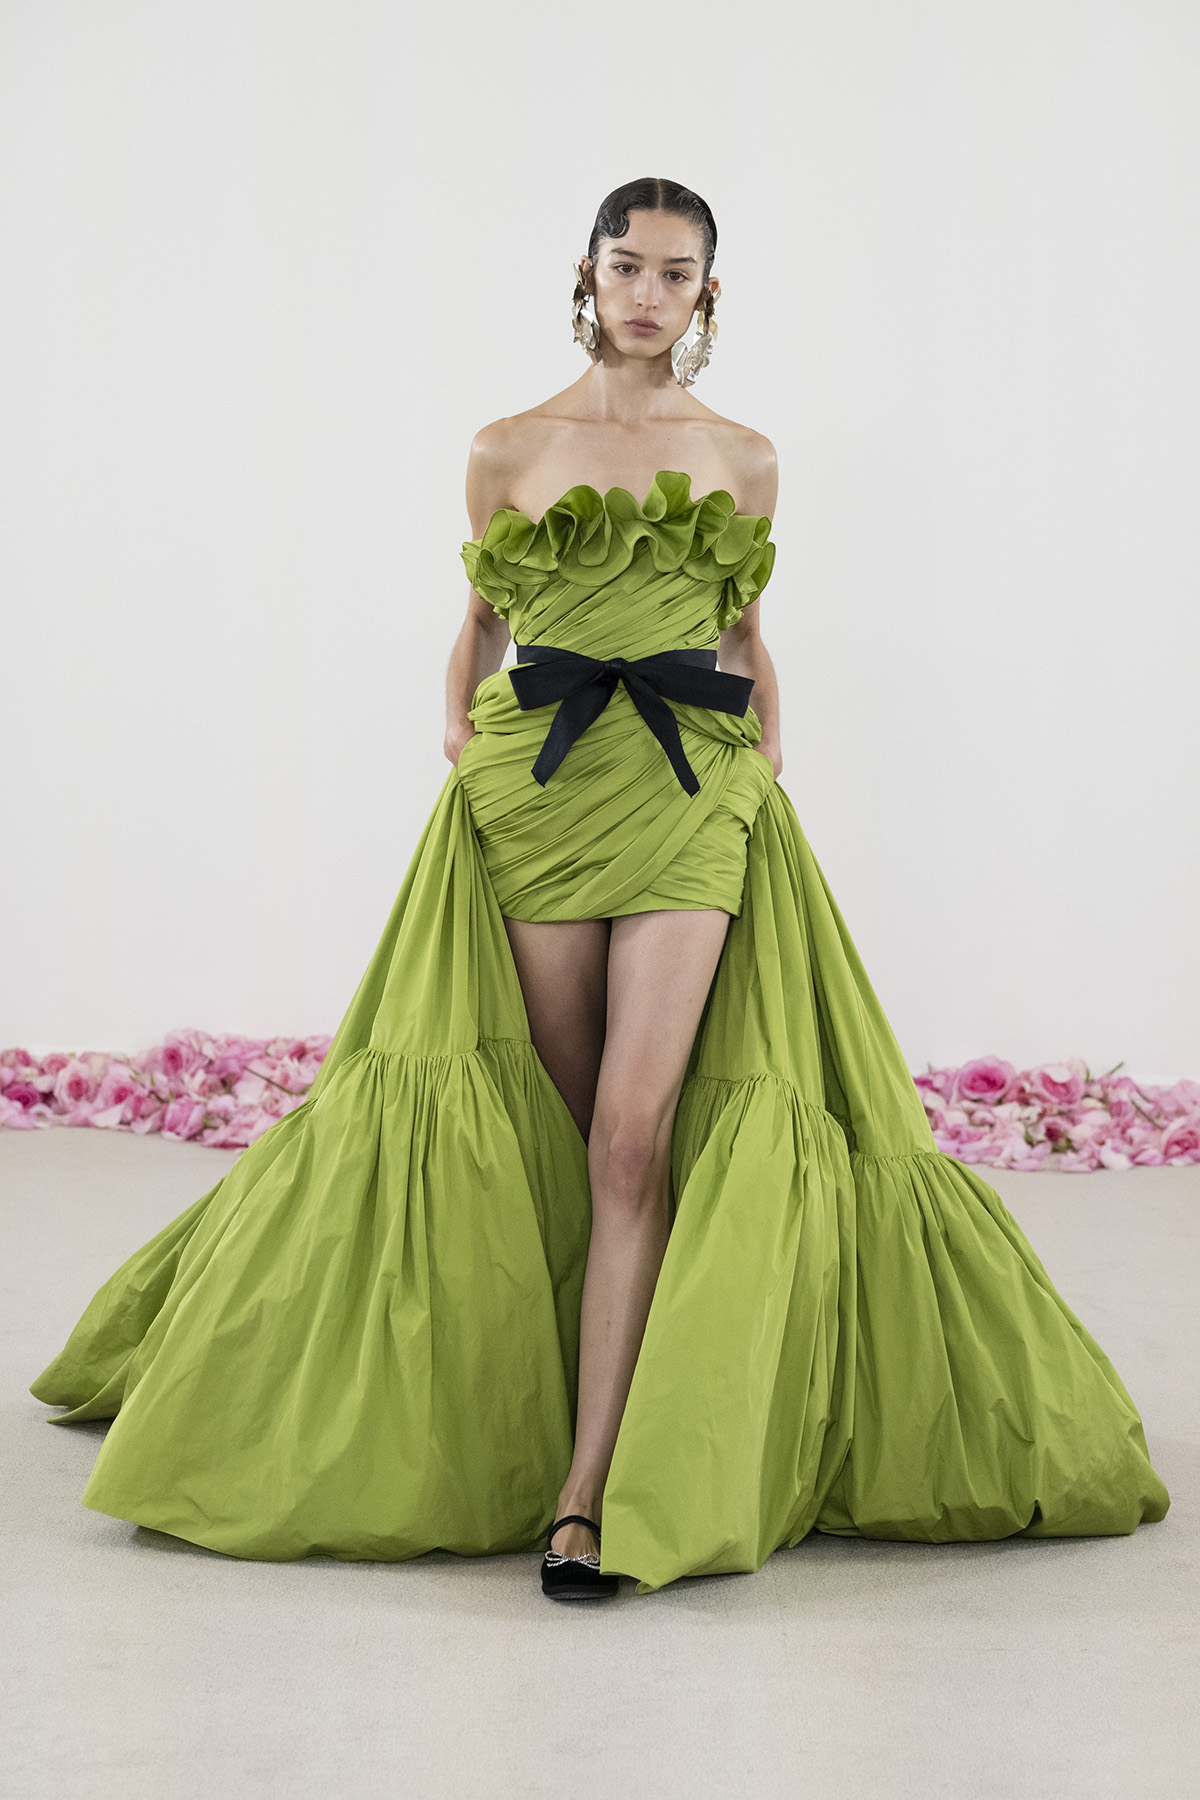 A woman wearing a long green ball gown that is long at the back and short at the front with a black bow around her waist